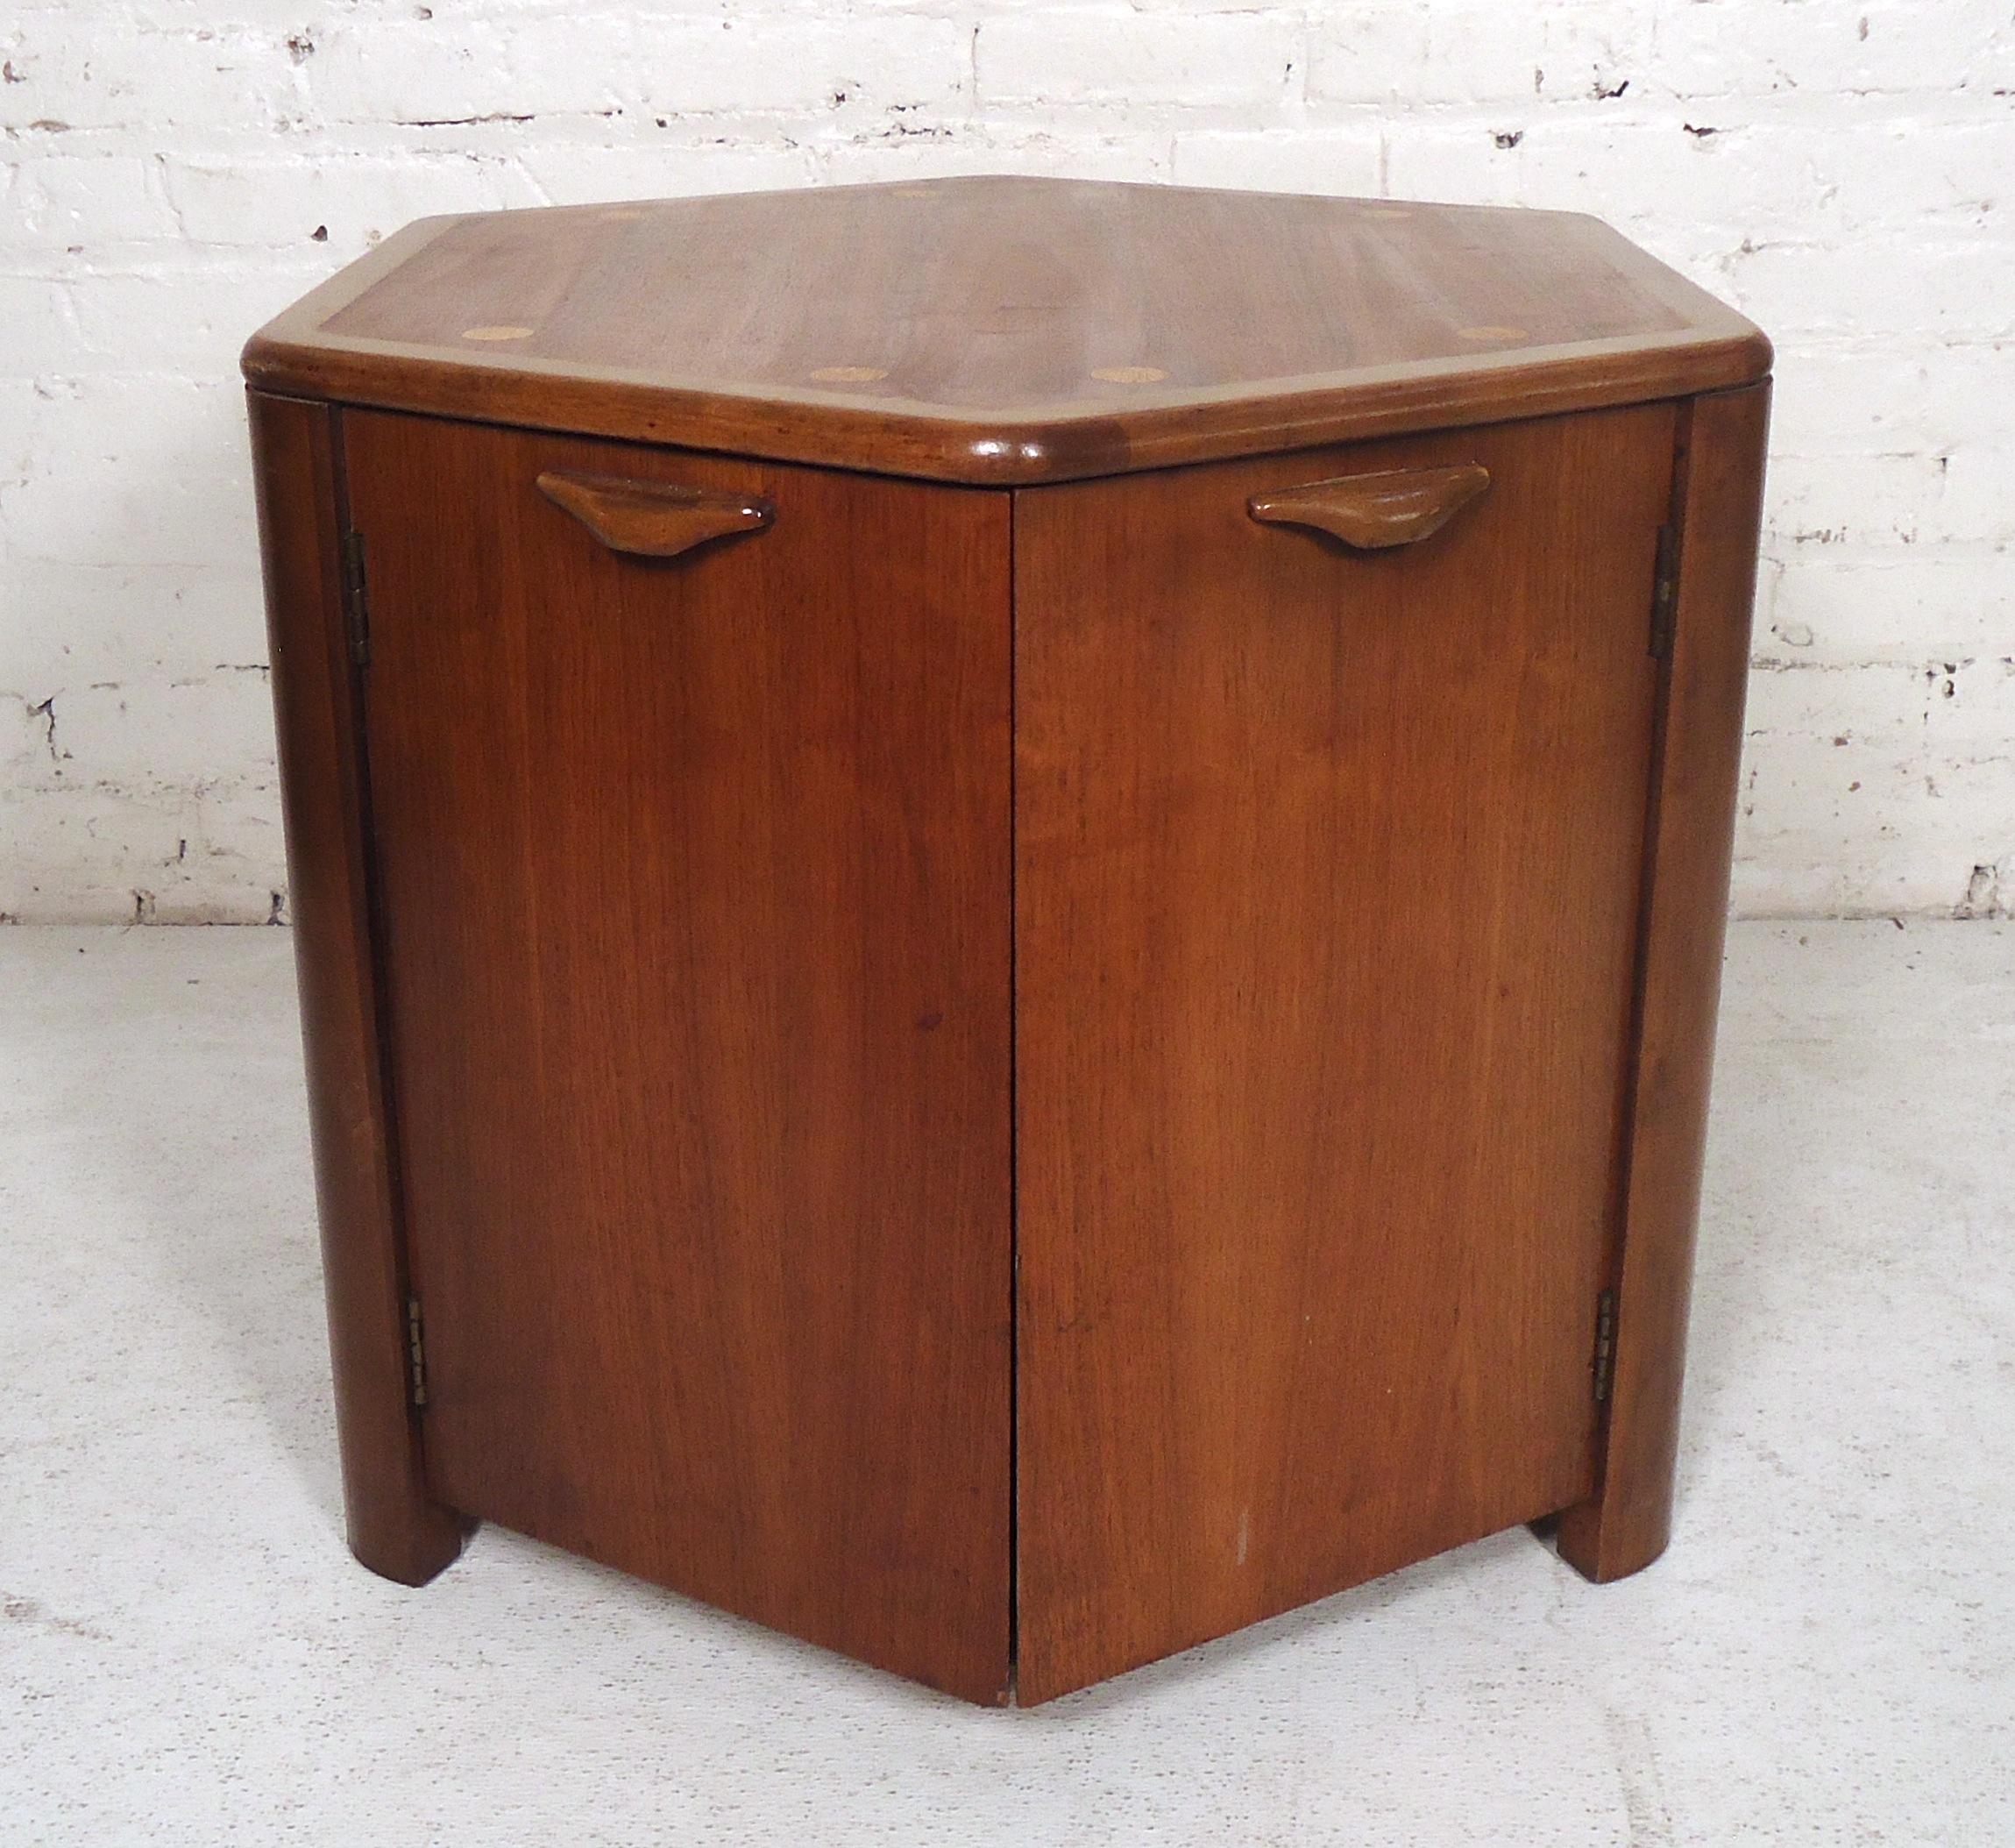 This beautiful vintage modern end table features two cabinet doors sculpted pulls. Unique two-tone design with oak and walnut wood grain showing quality craftsmanship. This wonderful six-sided table offers plenty of room for storage in its large